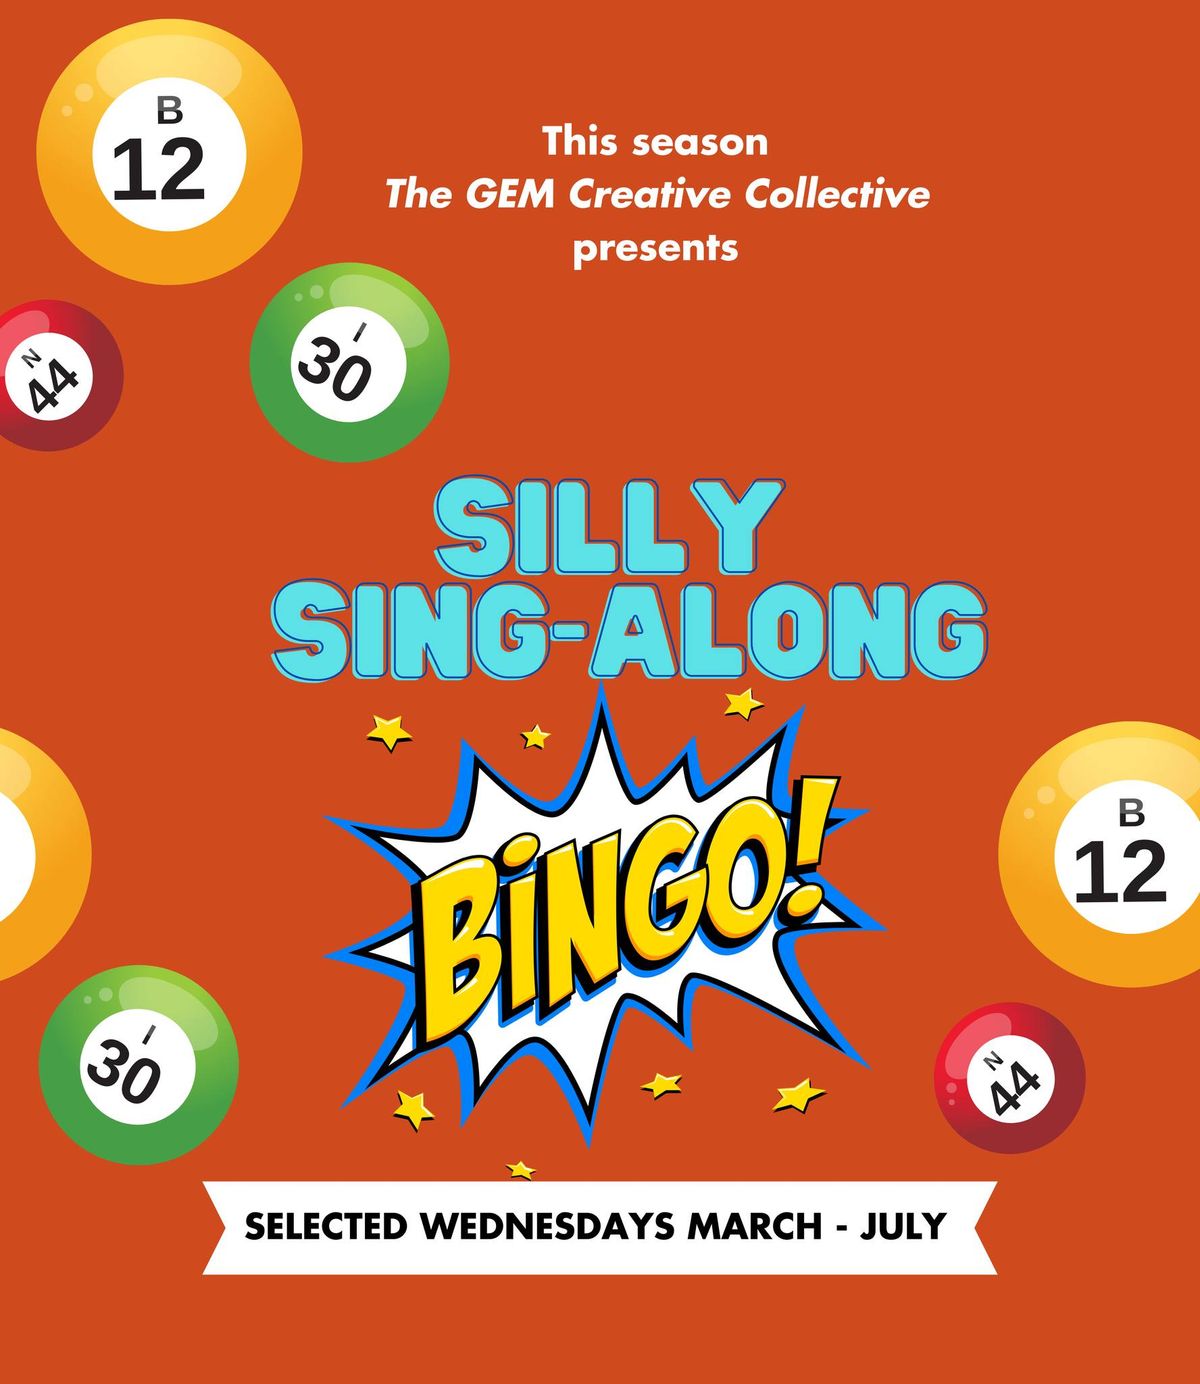 Silly Sing-A-Long Bingo at Stroud Sub Rooms